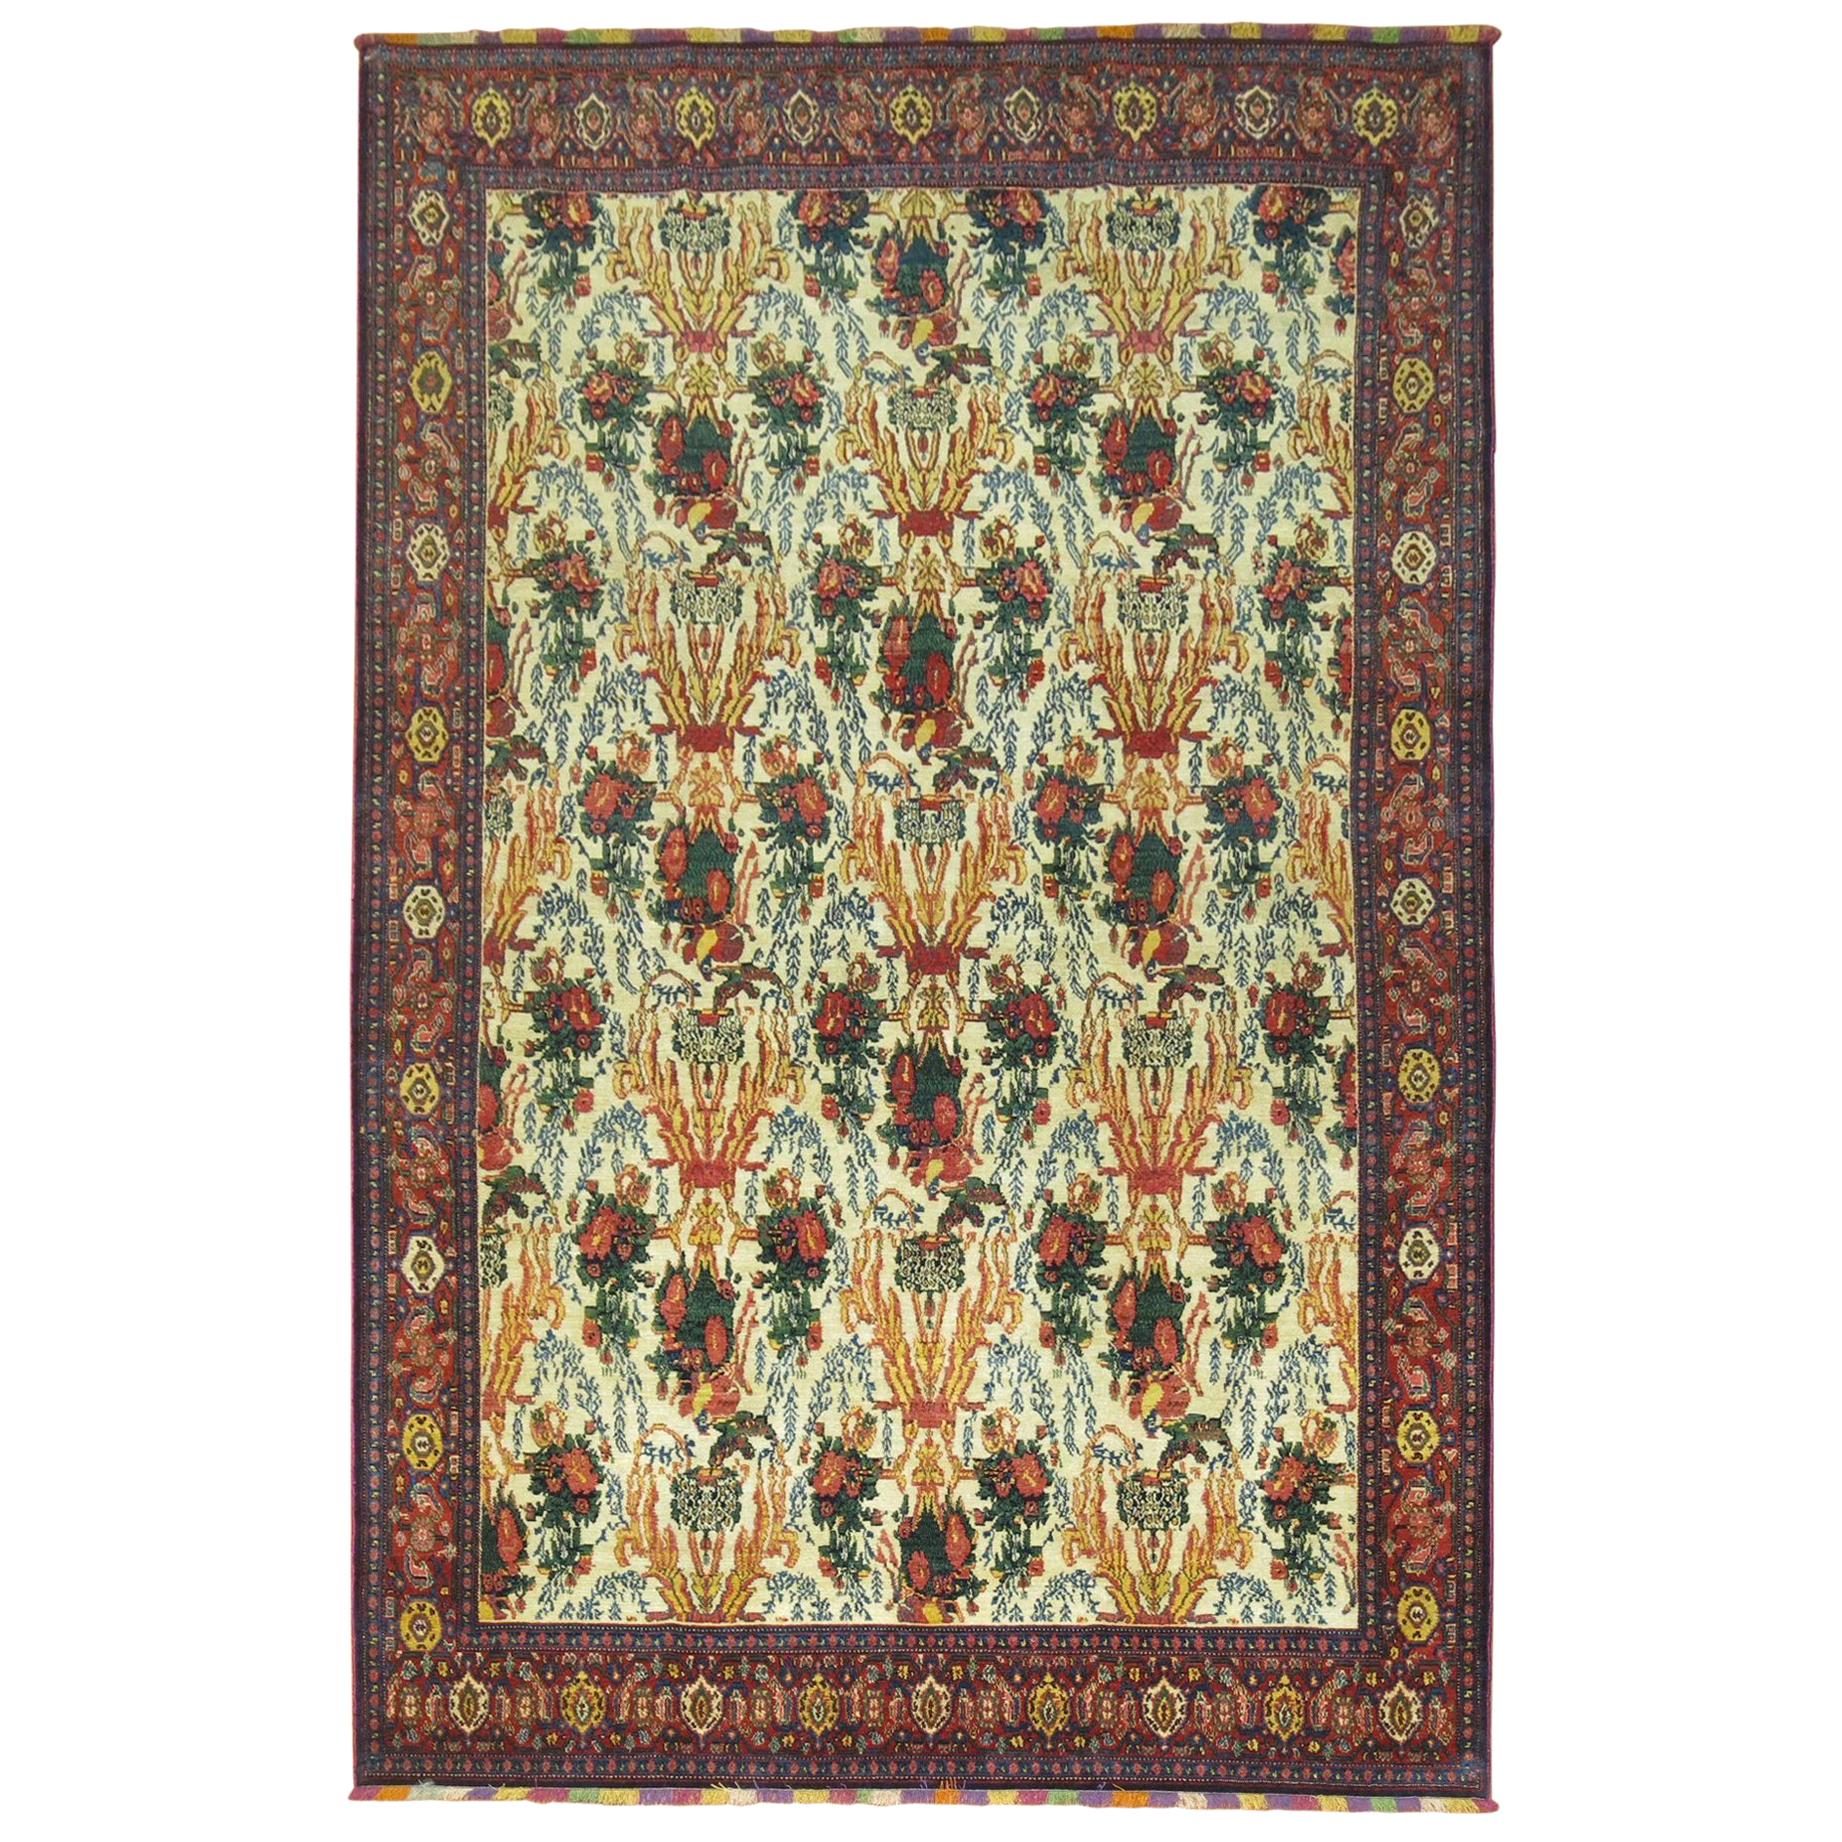 Antique Persian Senneh Rug with Silk Highlights and Fringes